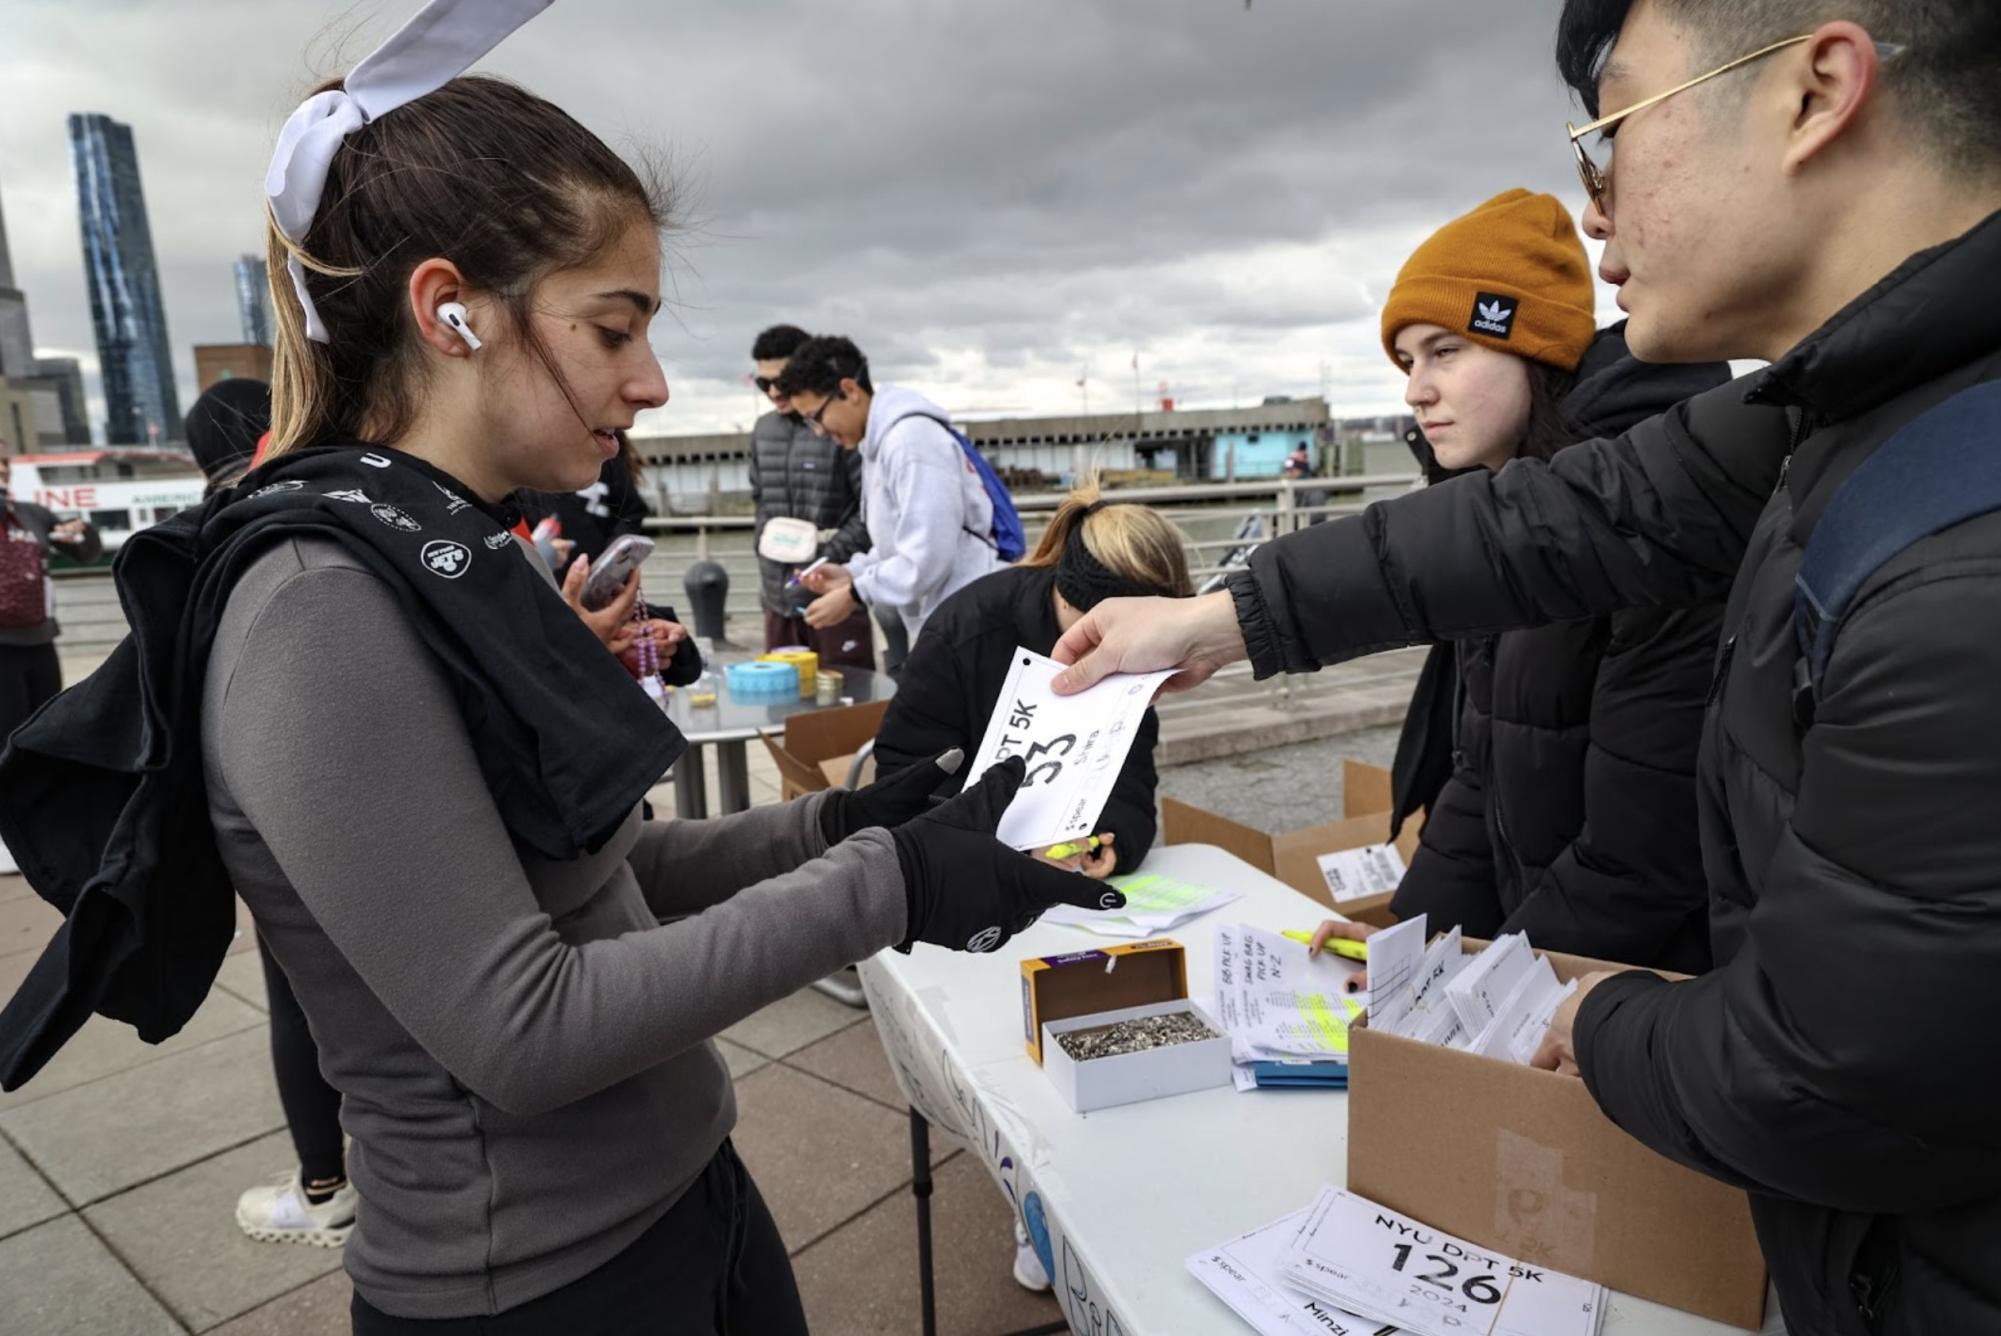 A man hands a participant her running number in front of the New York City shoreline.